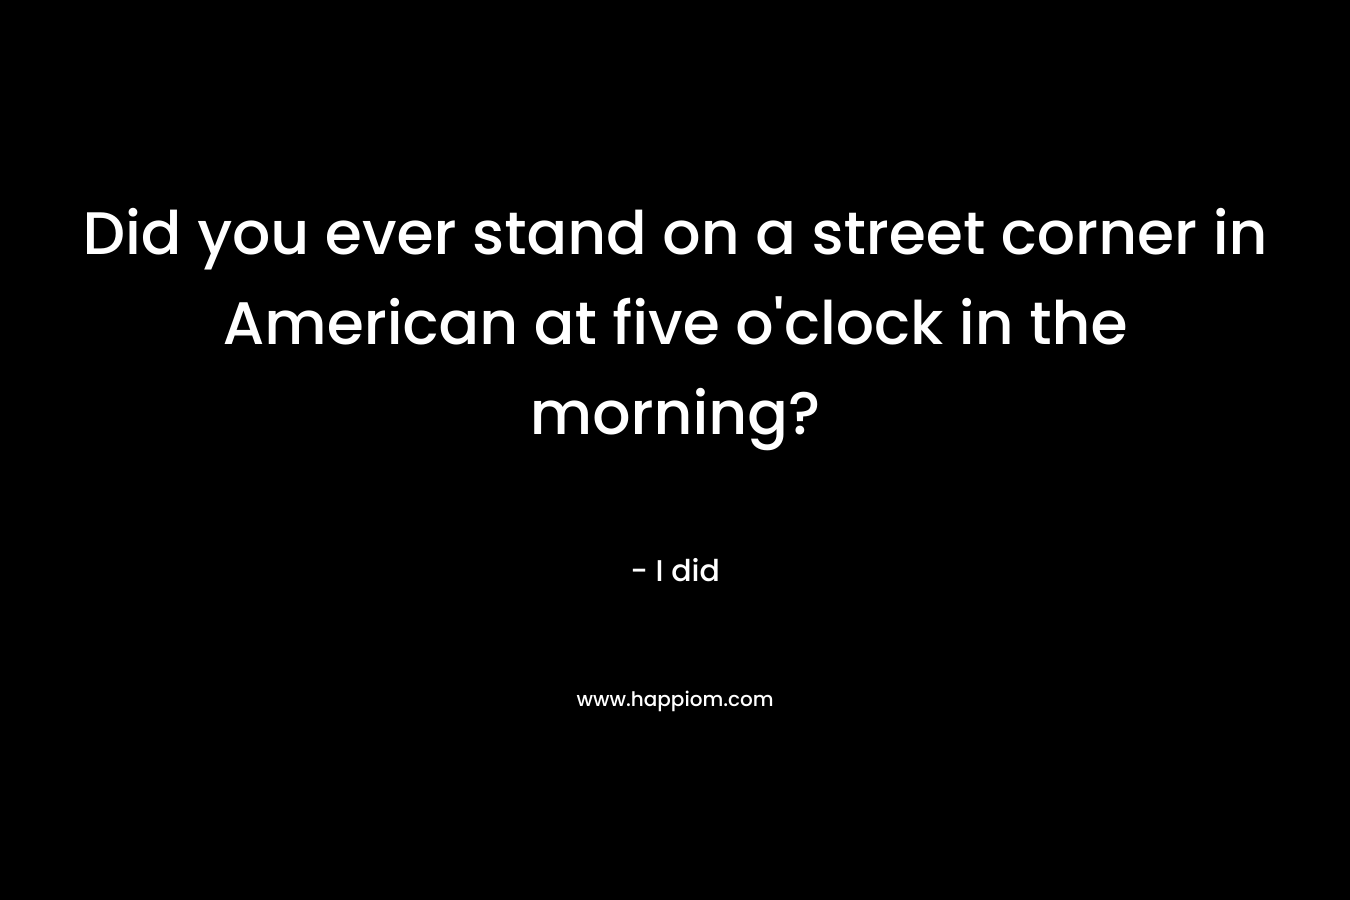 Did you ever stand on a street corner in American at five o’clock in the morning? – I did